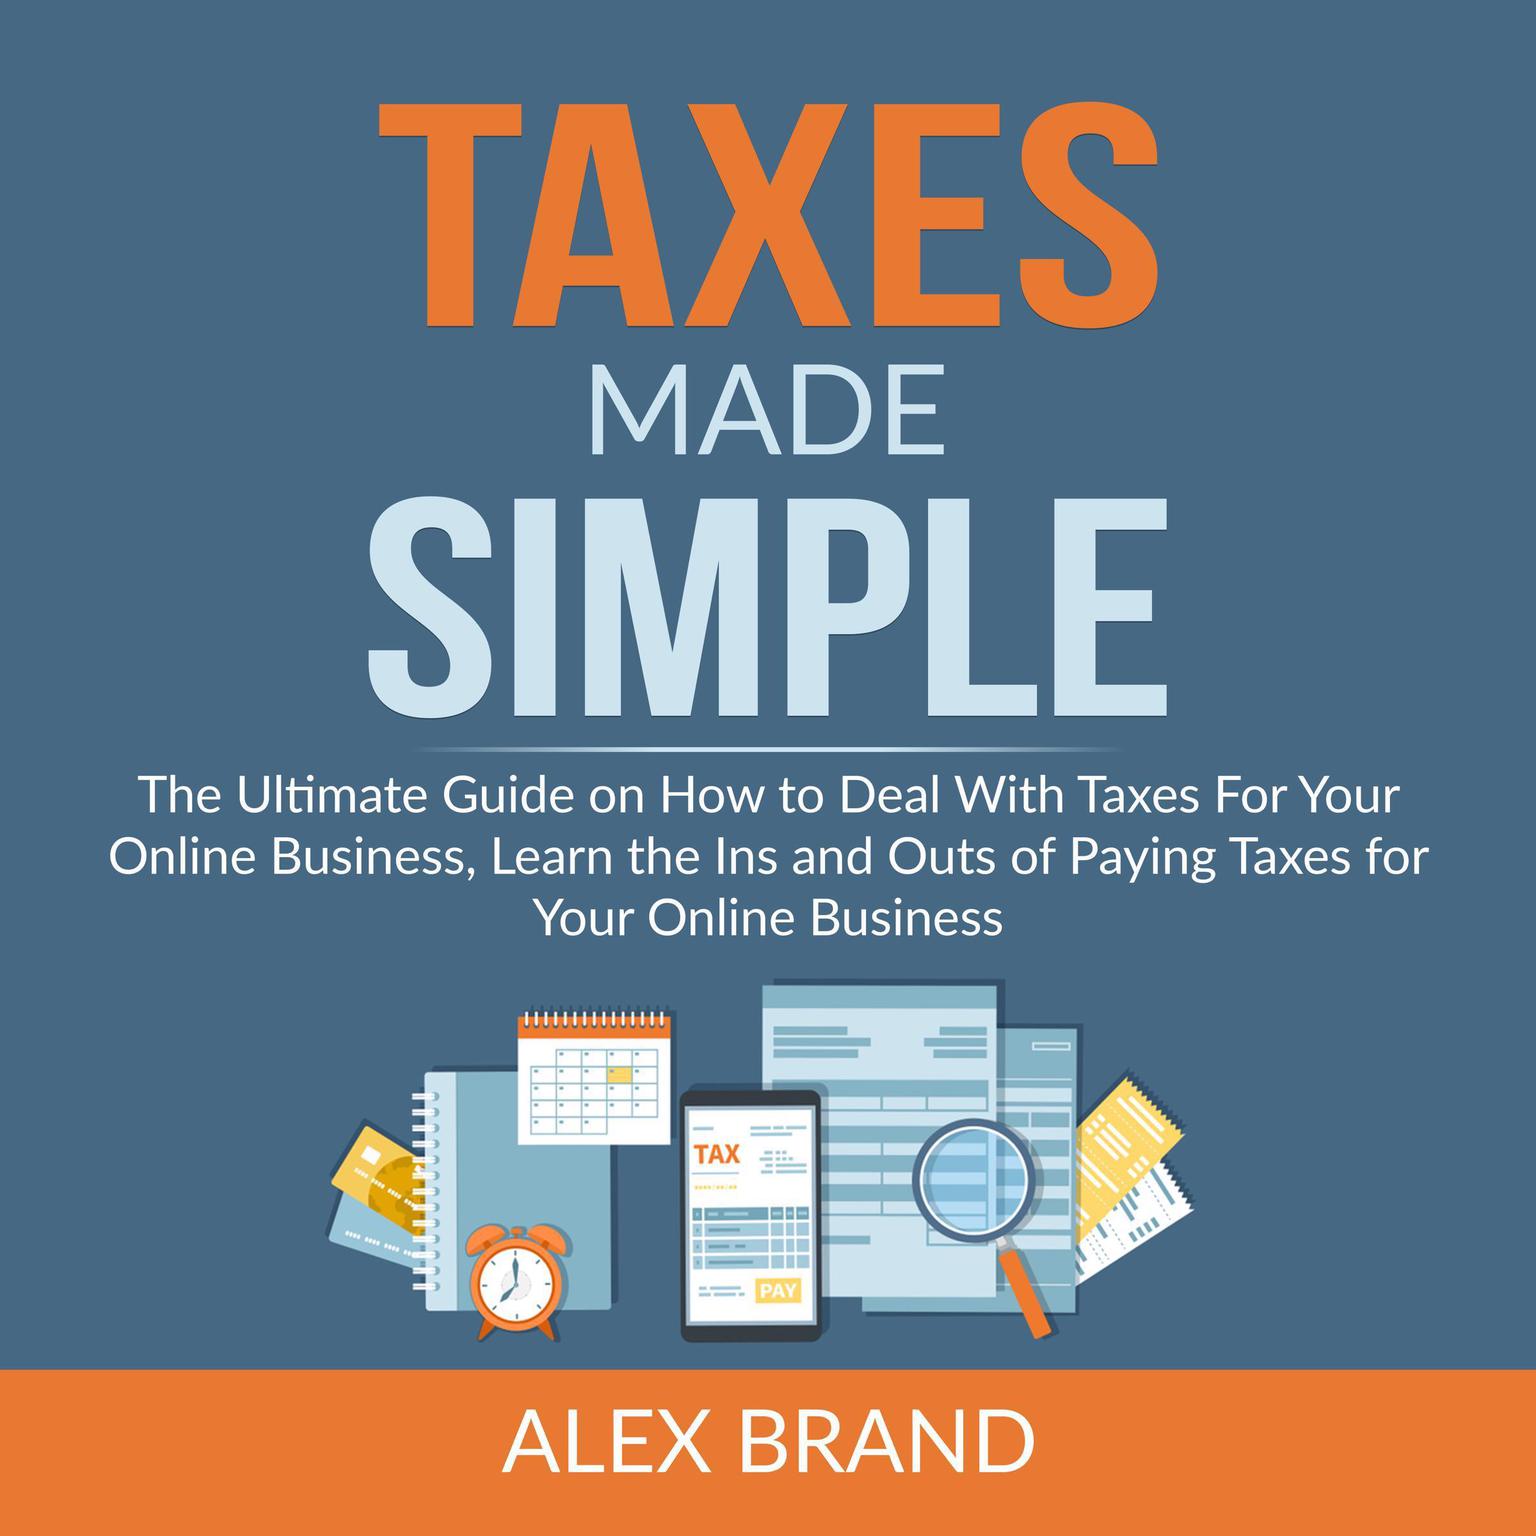 Taxes Made Simple: The Ultimate Guide on How to Deal With Taxes For Your Online Business, Learn the Ins and Outs of Paying Taxes for Your Online Business  Audiobook, by Alex Brand